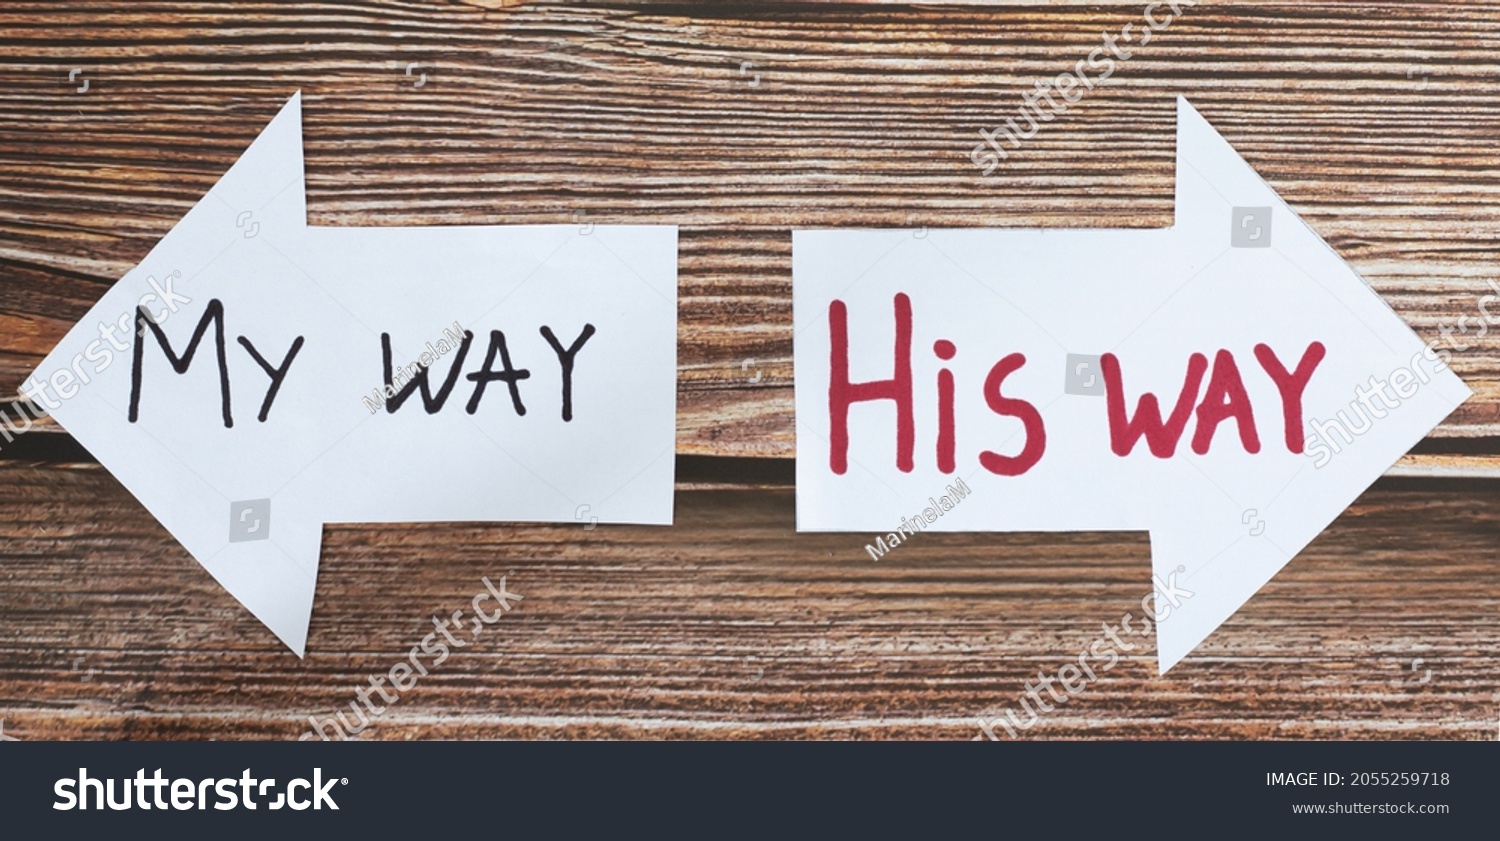 God Jesus Christ way of life. Choose the path to eternal life. Follow God. The biblical concept of godly wisdom, guidance, leading, and Christian growth. Handwritten words on paper arrows. A closeup. #2055259718